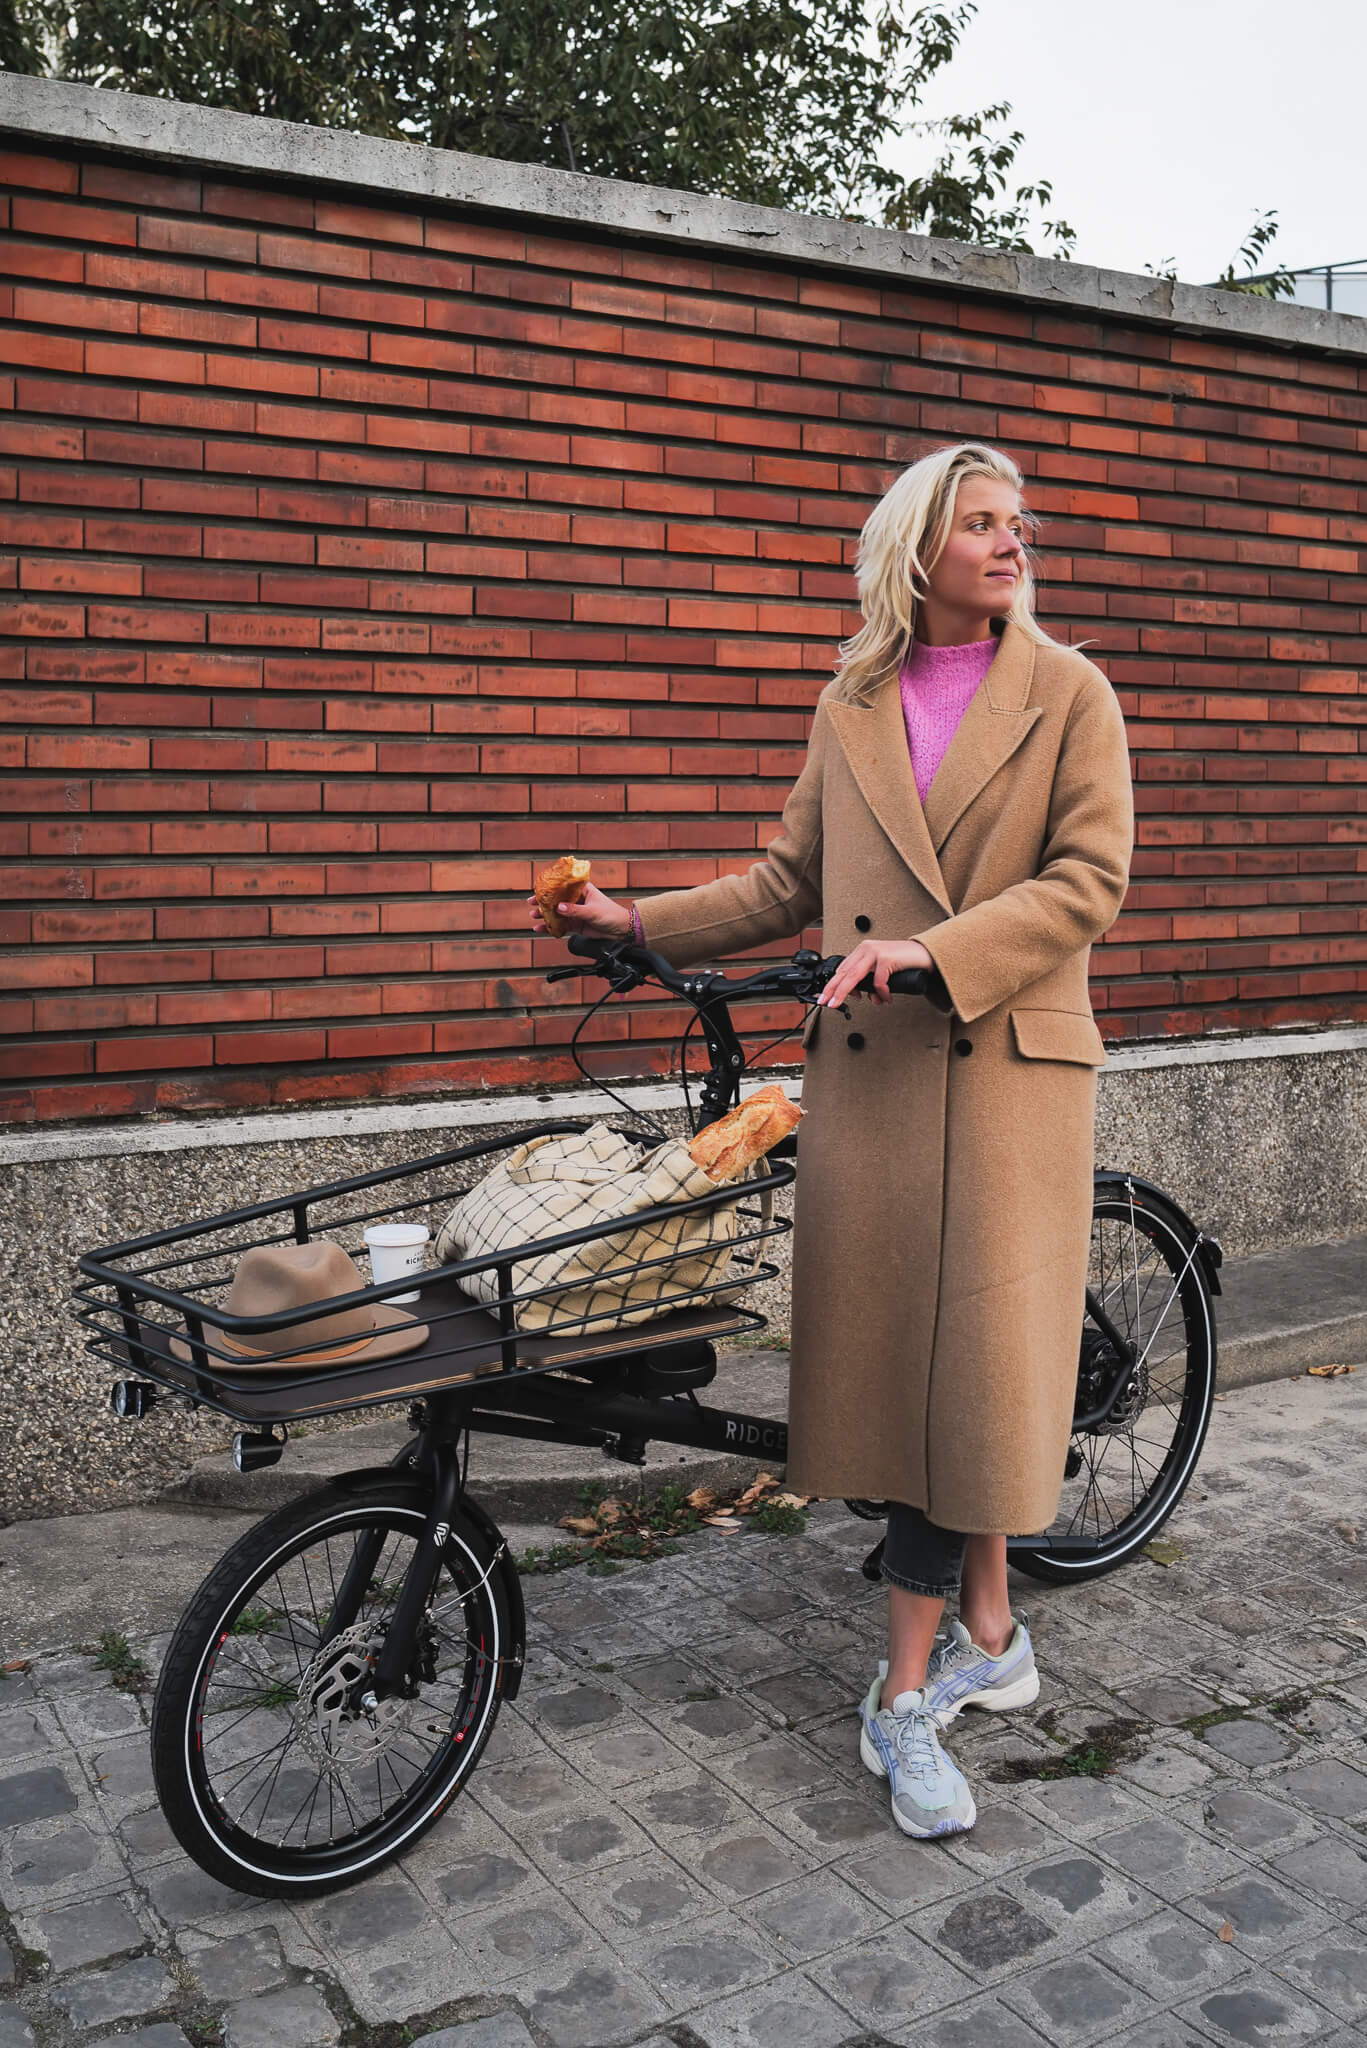 Young mother doing her shopping after dropping off her children on her cargo bike.